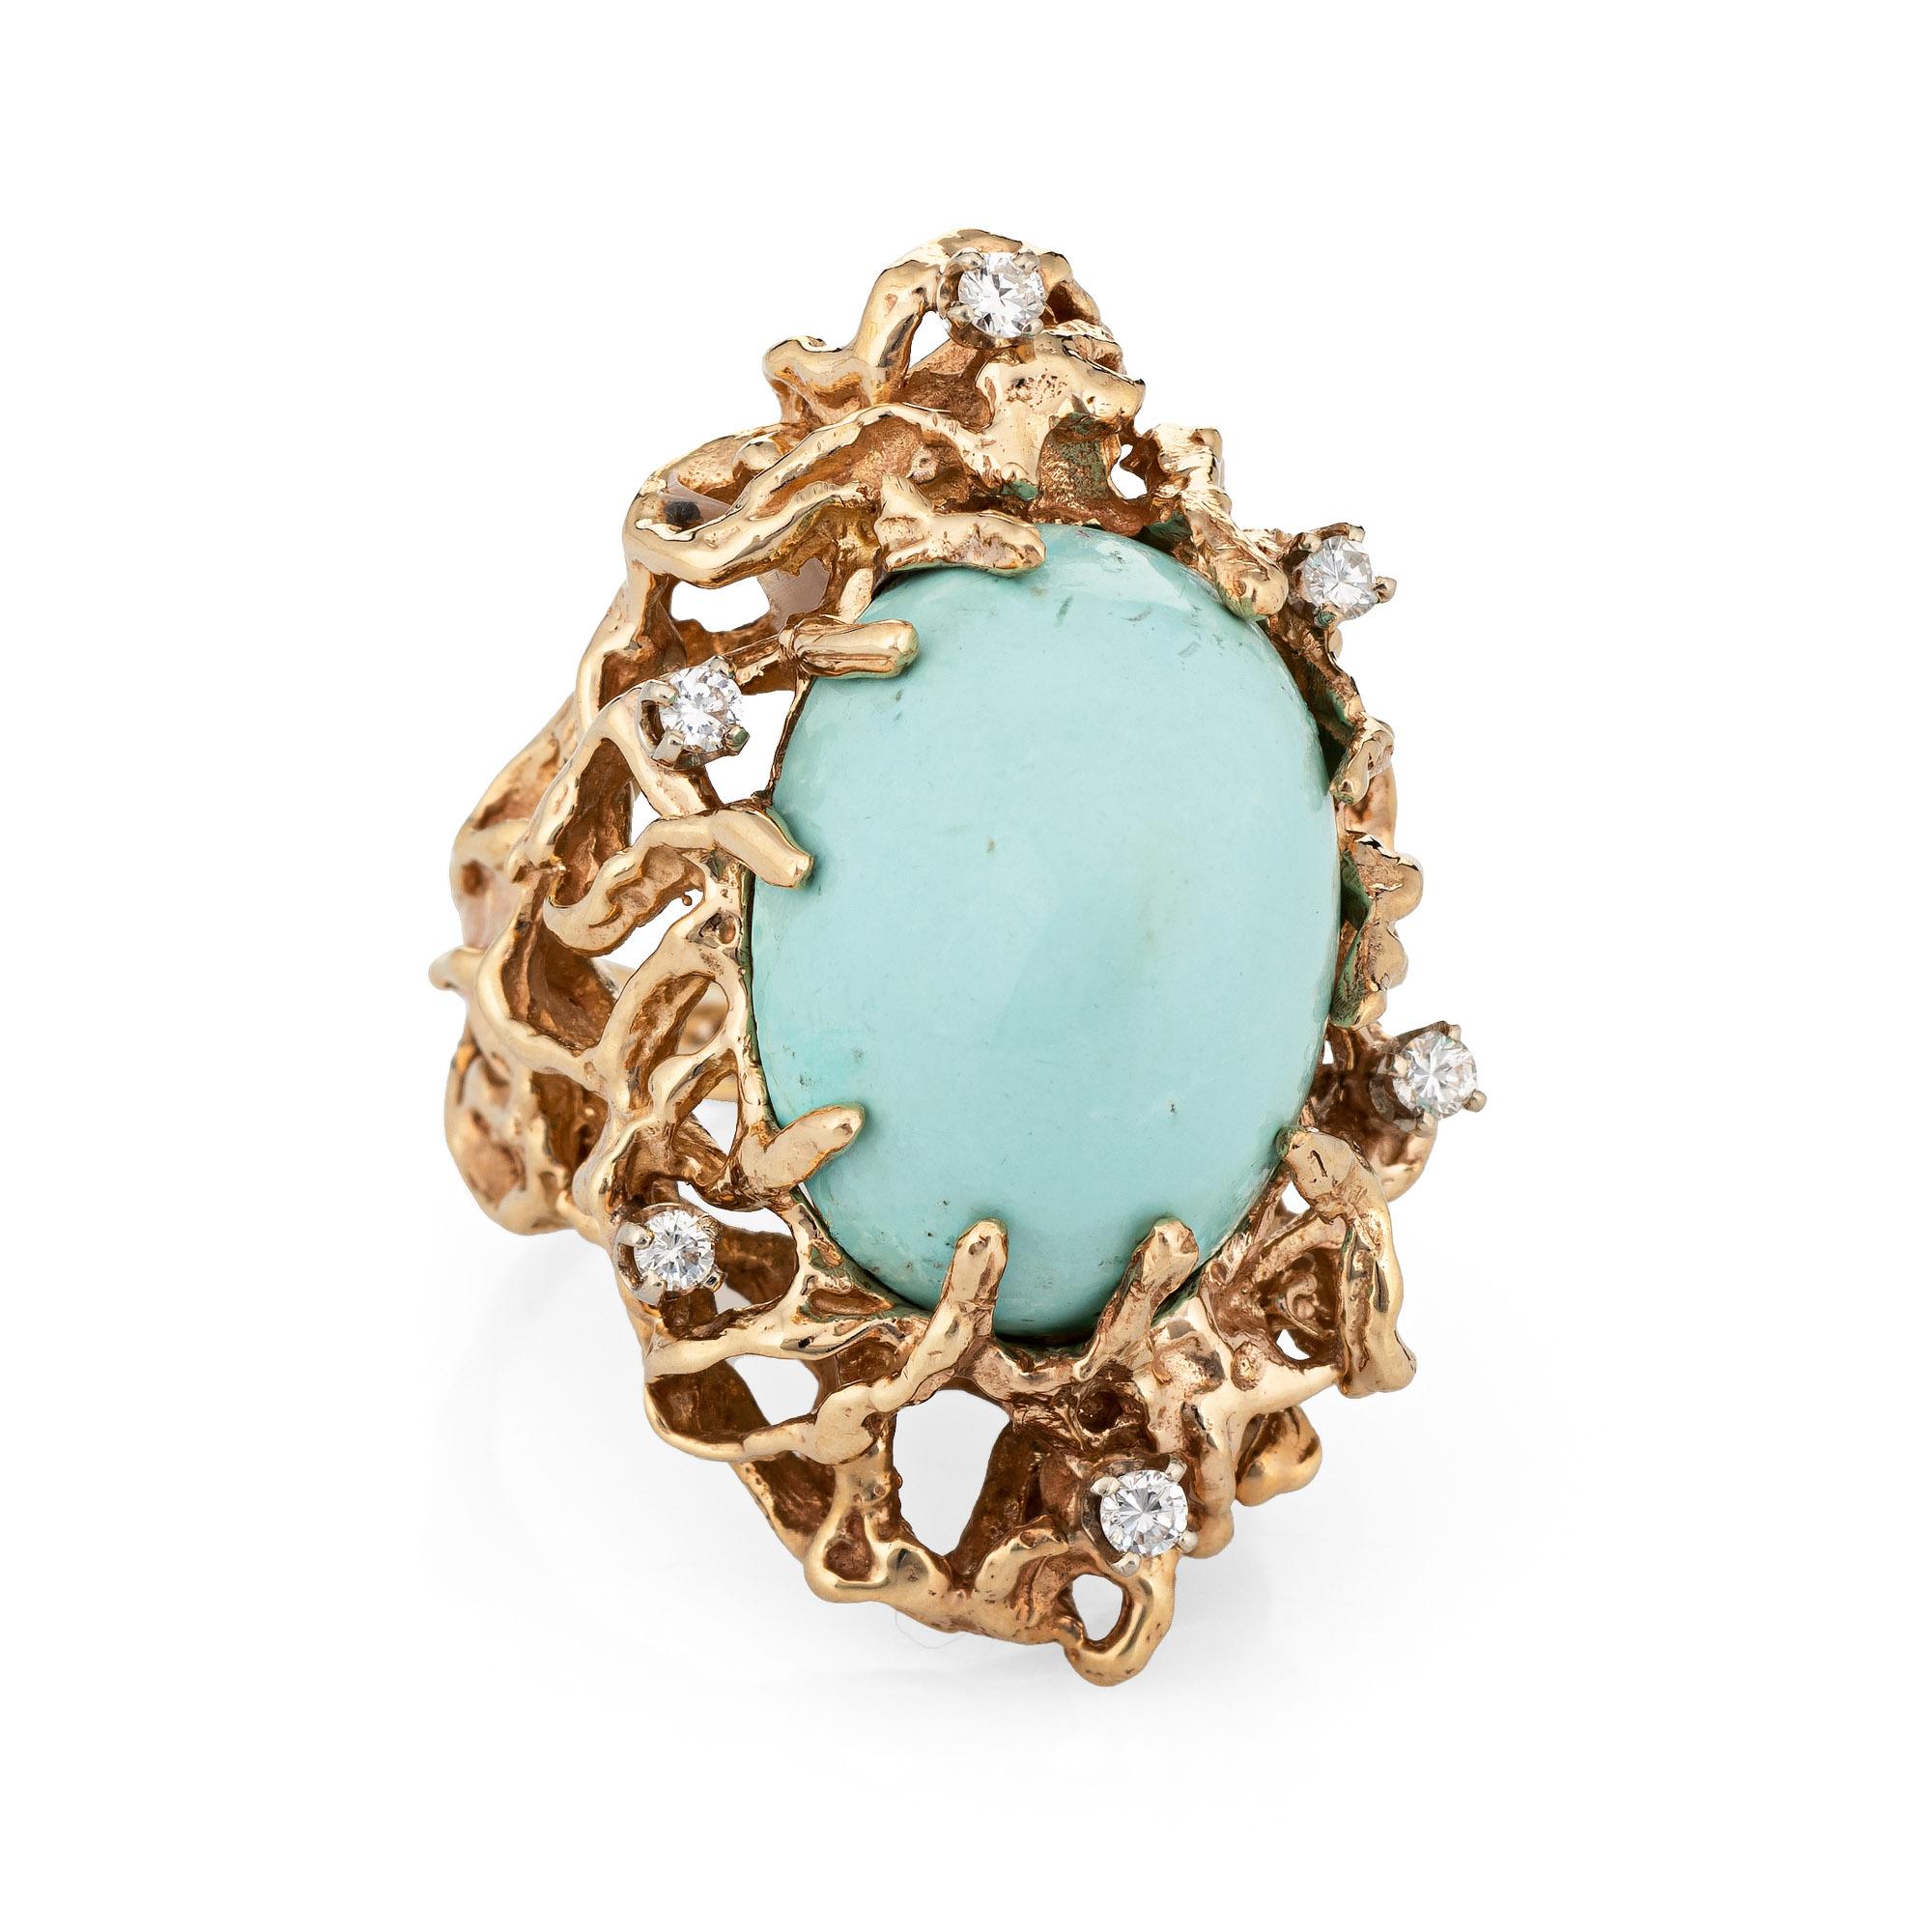 Stylish vintage turquoise & diamond large abstract ring (circa 1960s to 1970s) crafted in 14 karat yellow gold. 

Cabochon cut turquoise measures 120mm x 15mm (estimated at 32 carats), accented with an estimated 0.18 carats of diamonds (estimated at